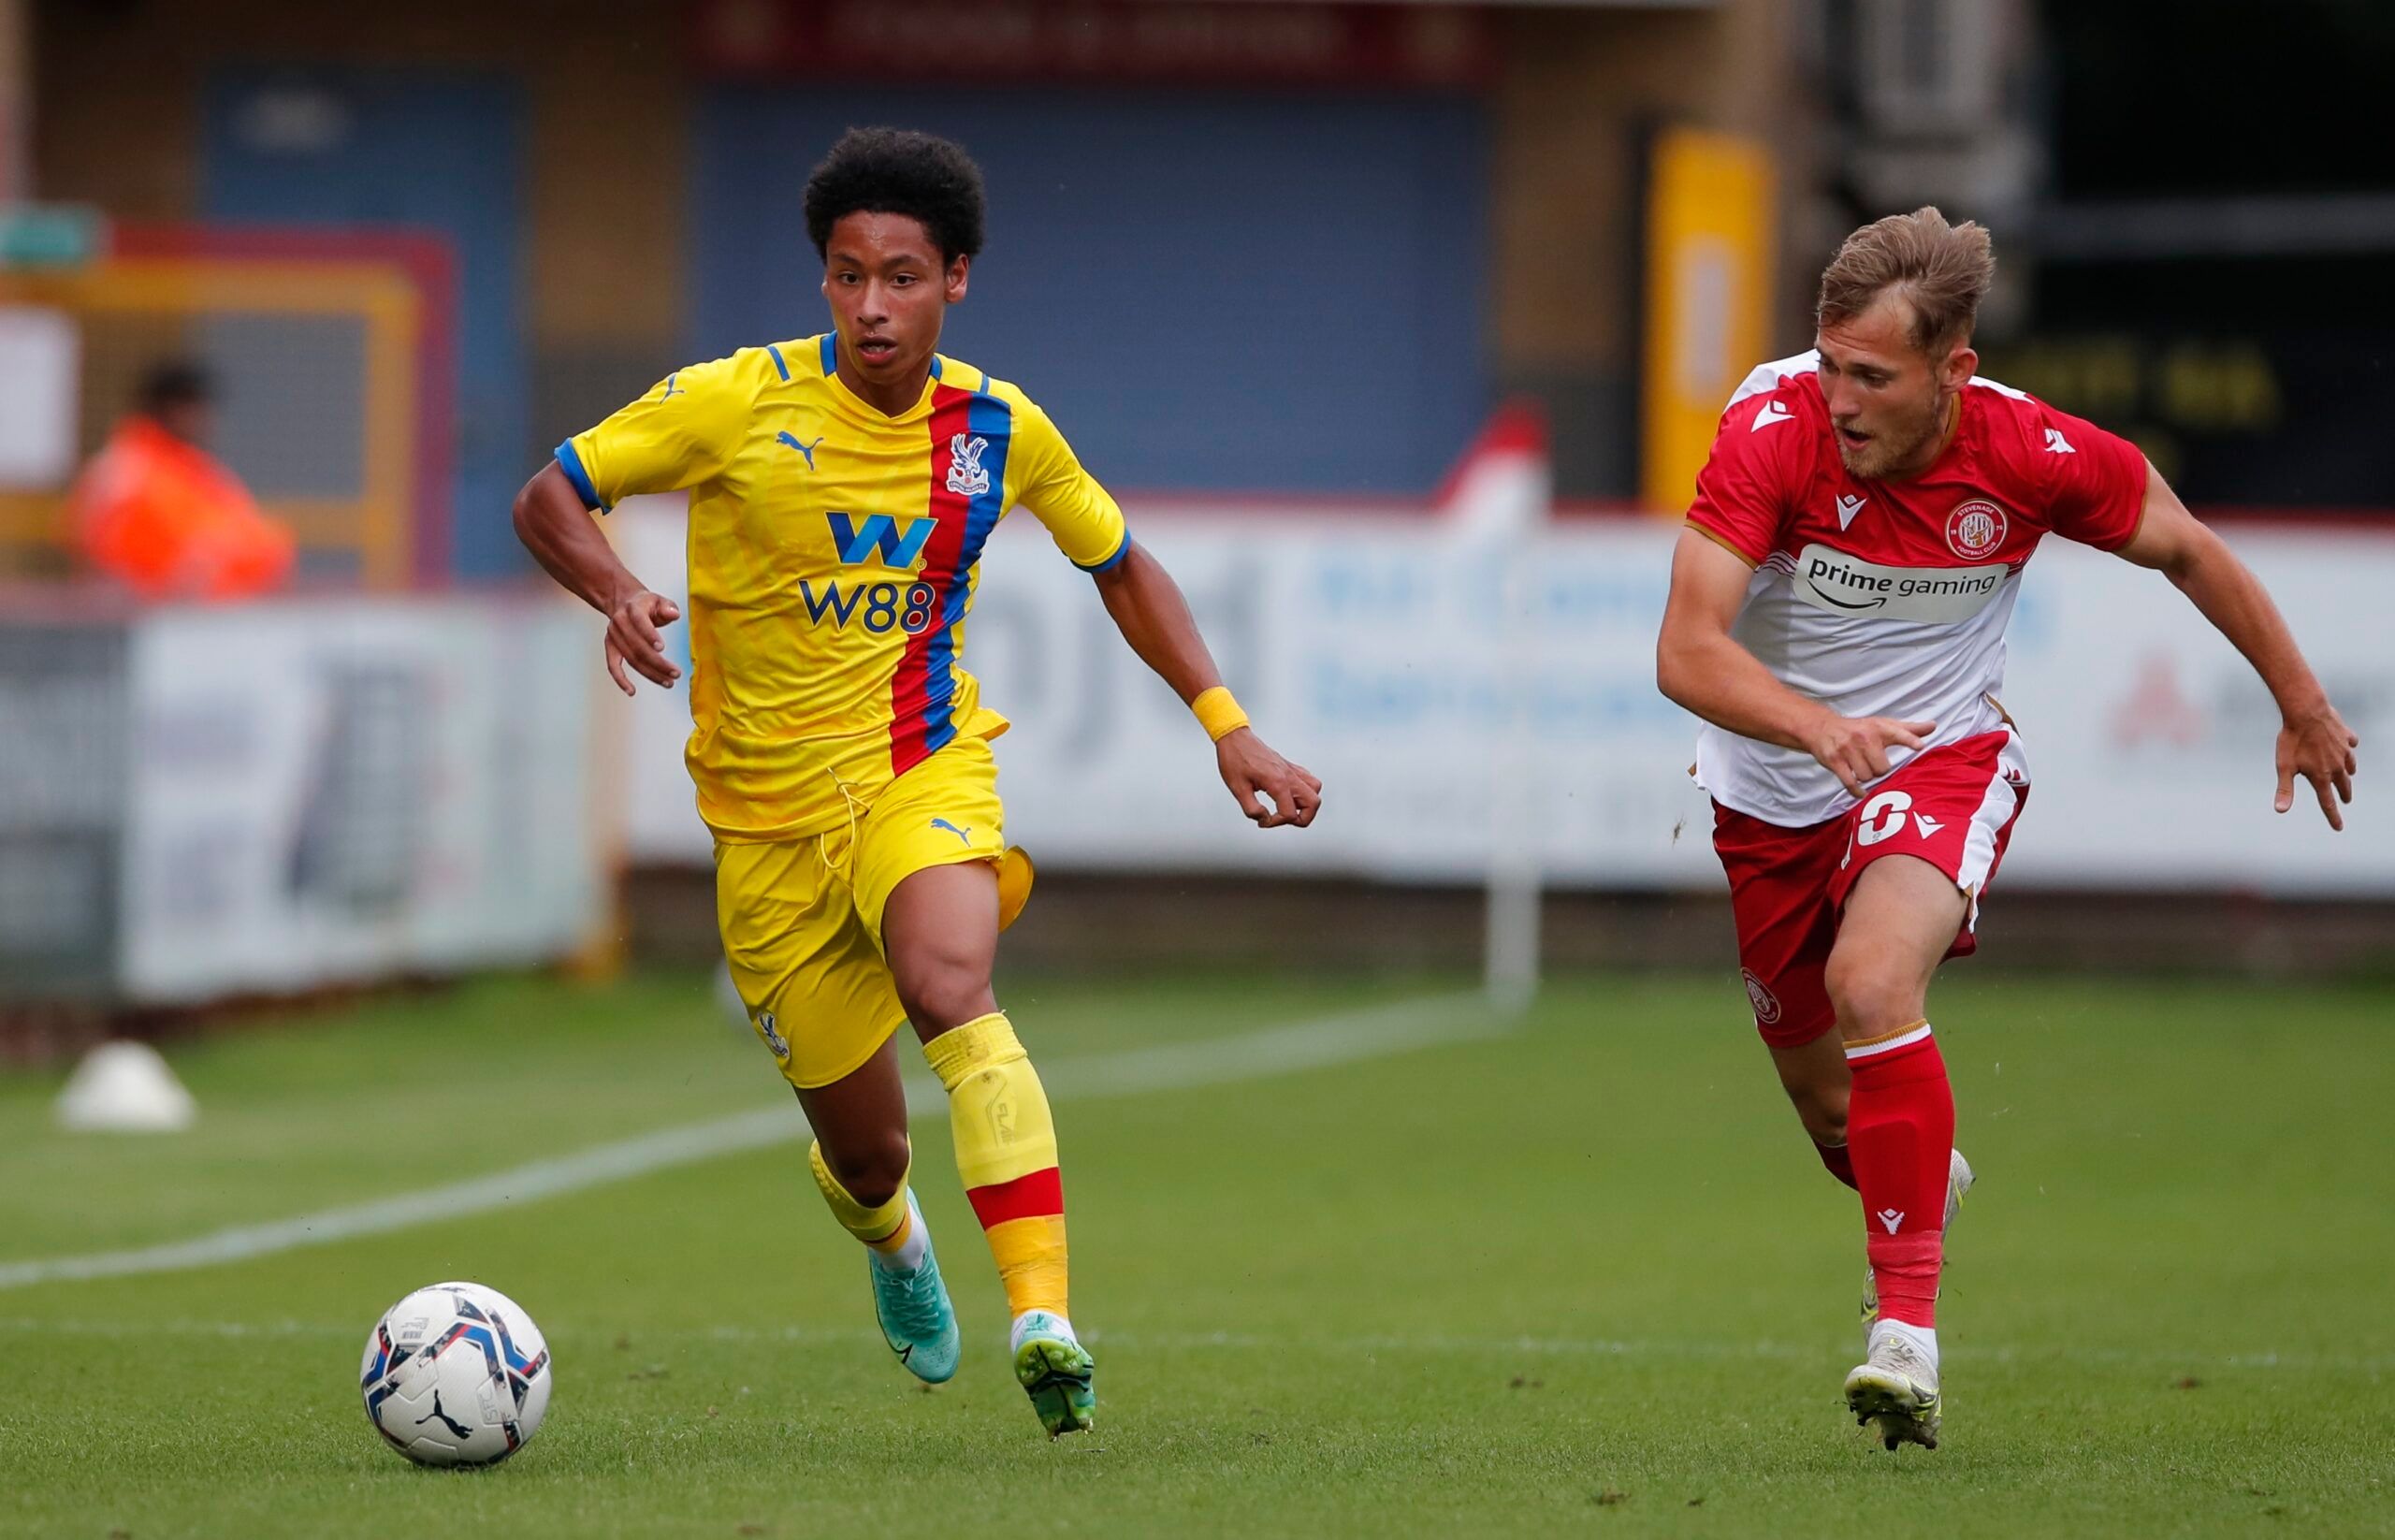 Soccer Football - Pre Season Friendly - Stevenage v Crystal Palace - The Lamex Stadium, Stevenage, Britain - July 23, 2021  Crystal Palace's Sean Robertson in action Action Images via Reuters/Andrew Couldridge